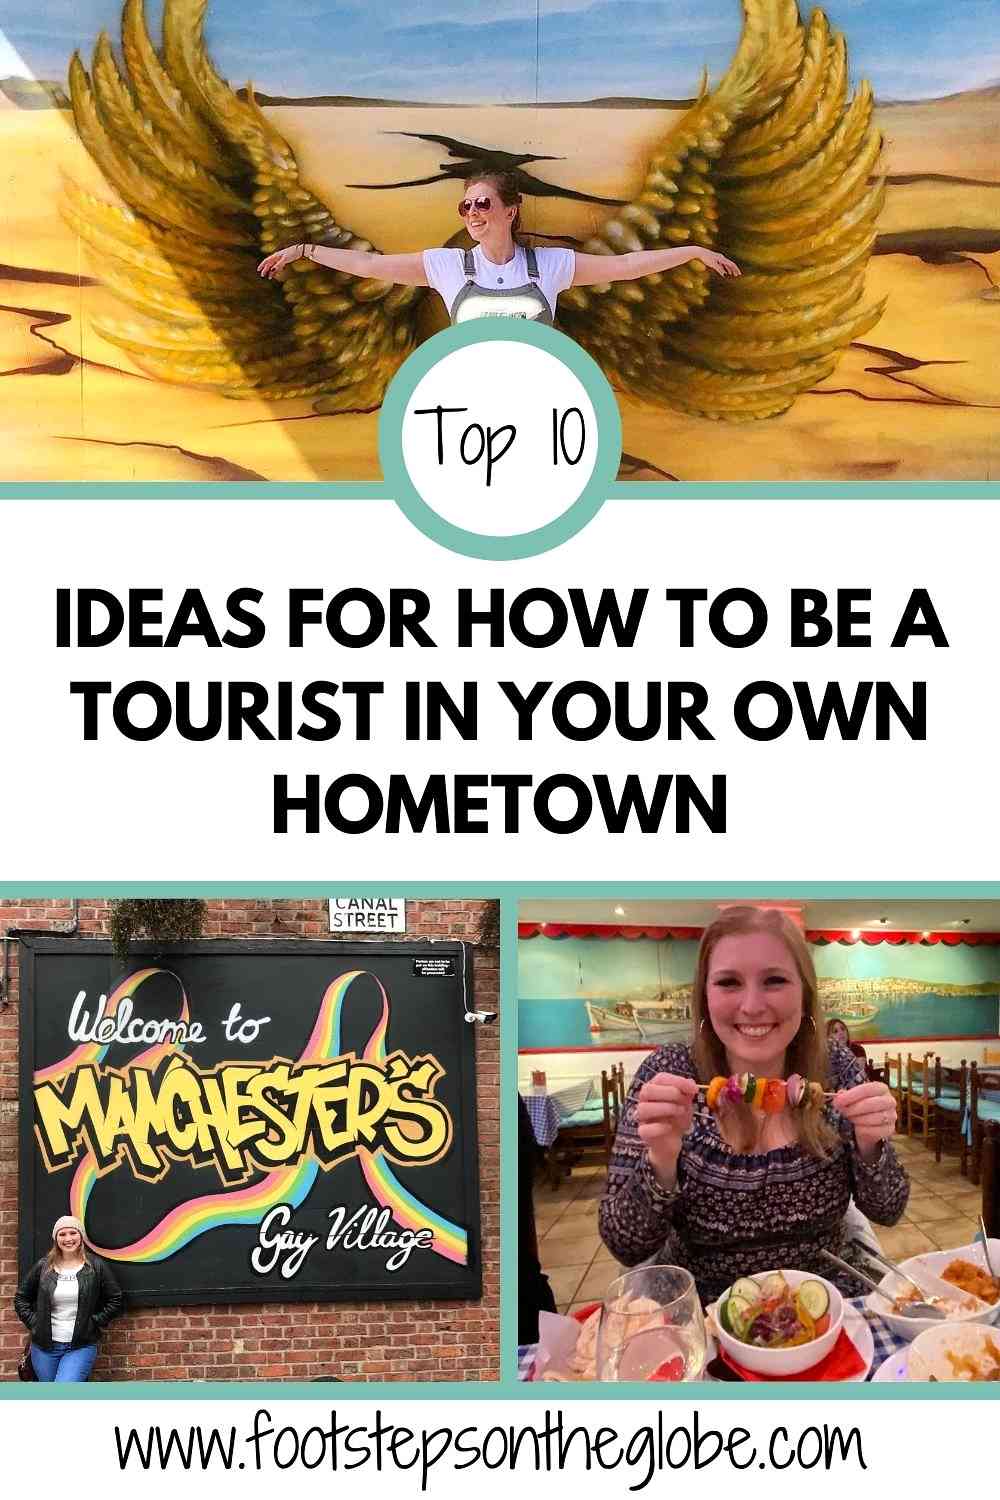 Pinterest image of different scenes in Manchester, UK with the text: "Top 10 ideas for how to be a tourist in your own hometown"